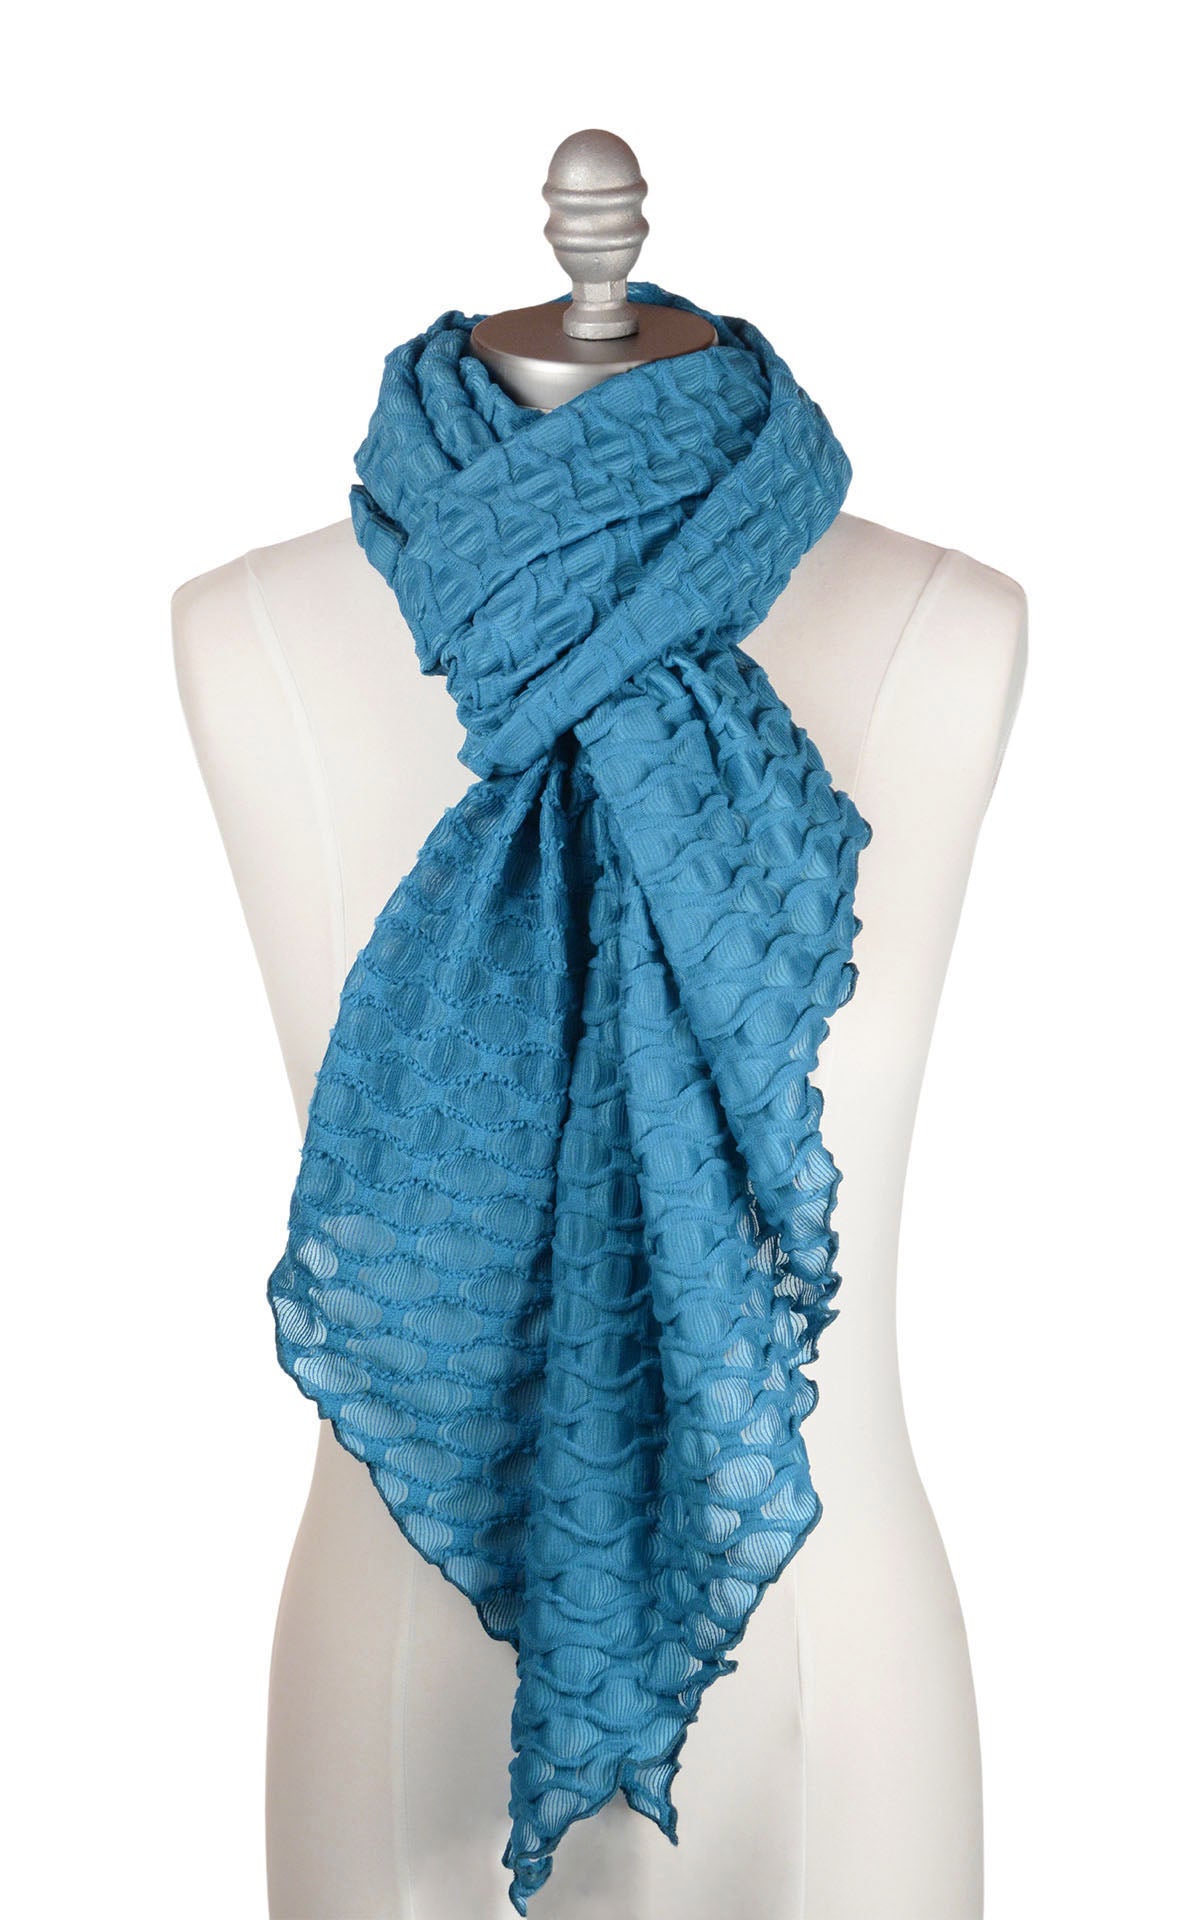 Handkerchief Scarf - Fractal Collection